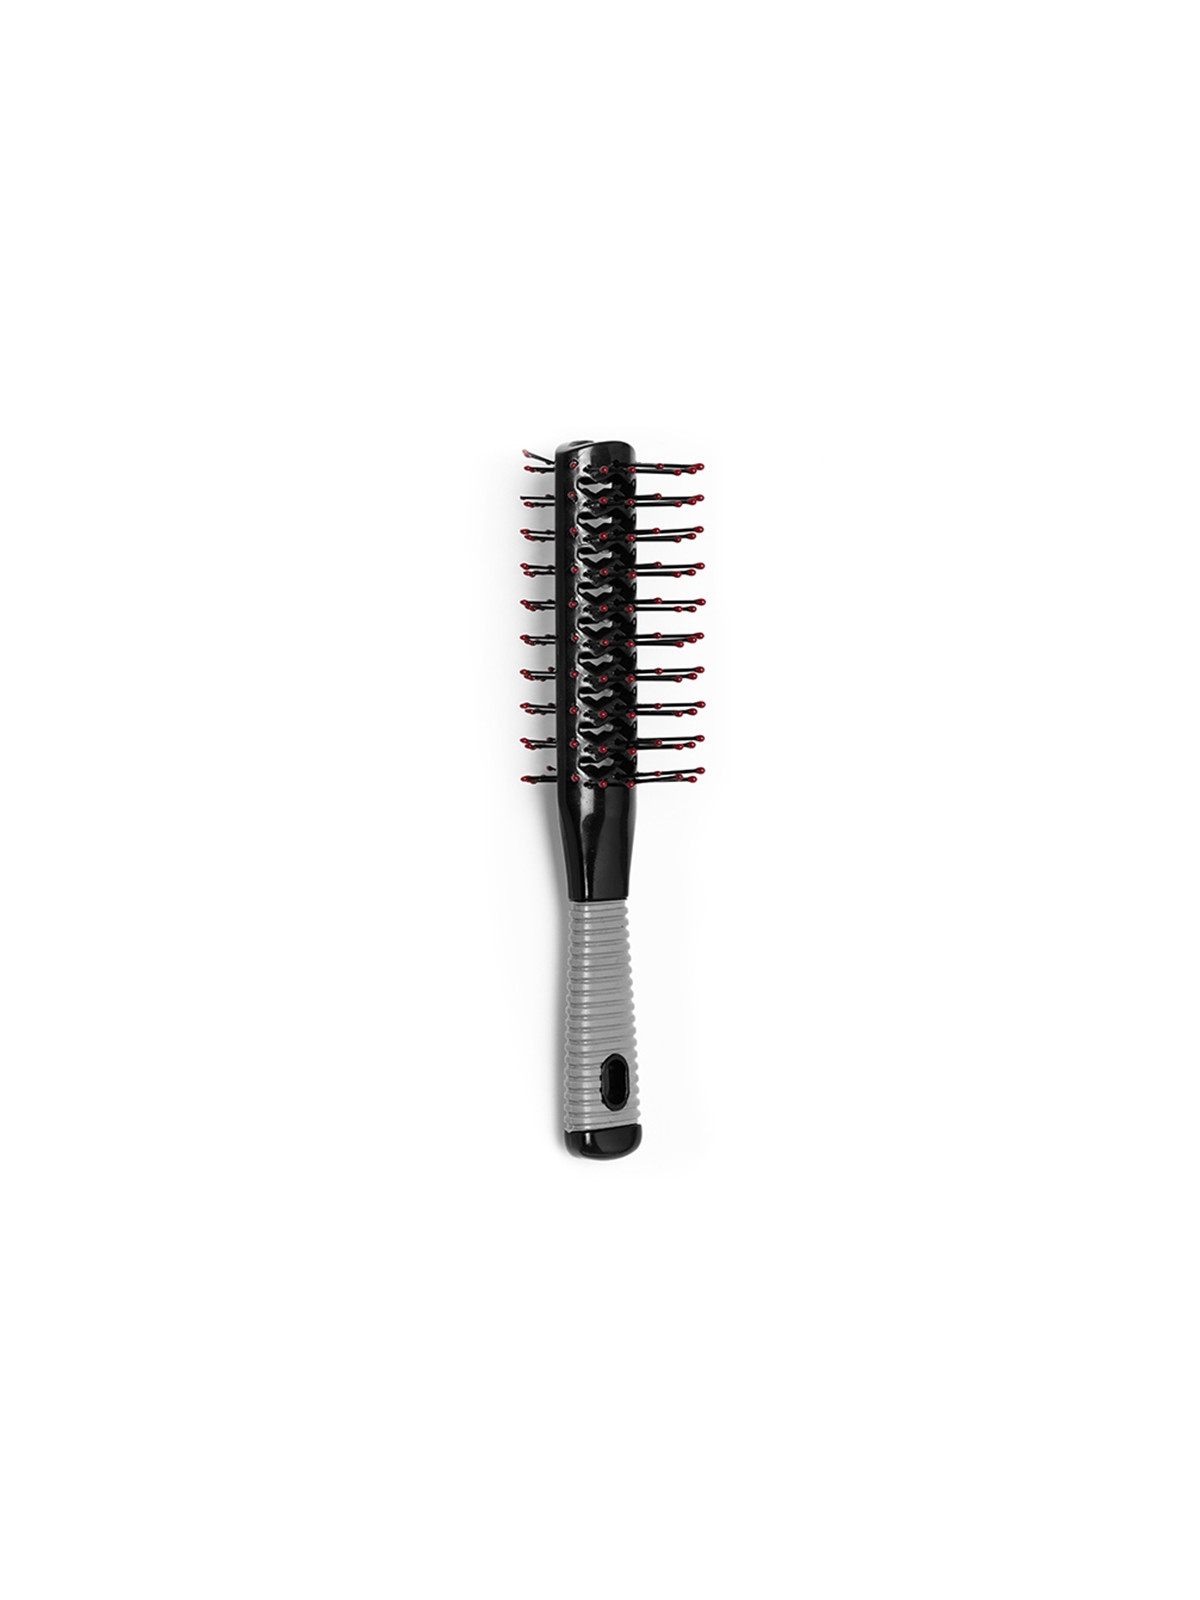 Bravehead Antistatic Double Sided Tunnel Brush